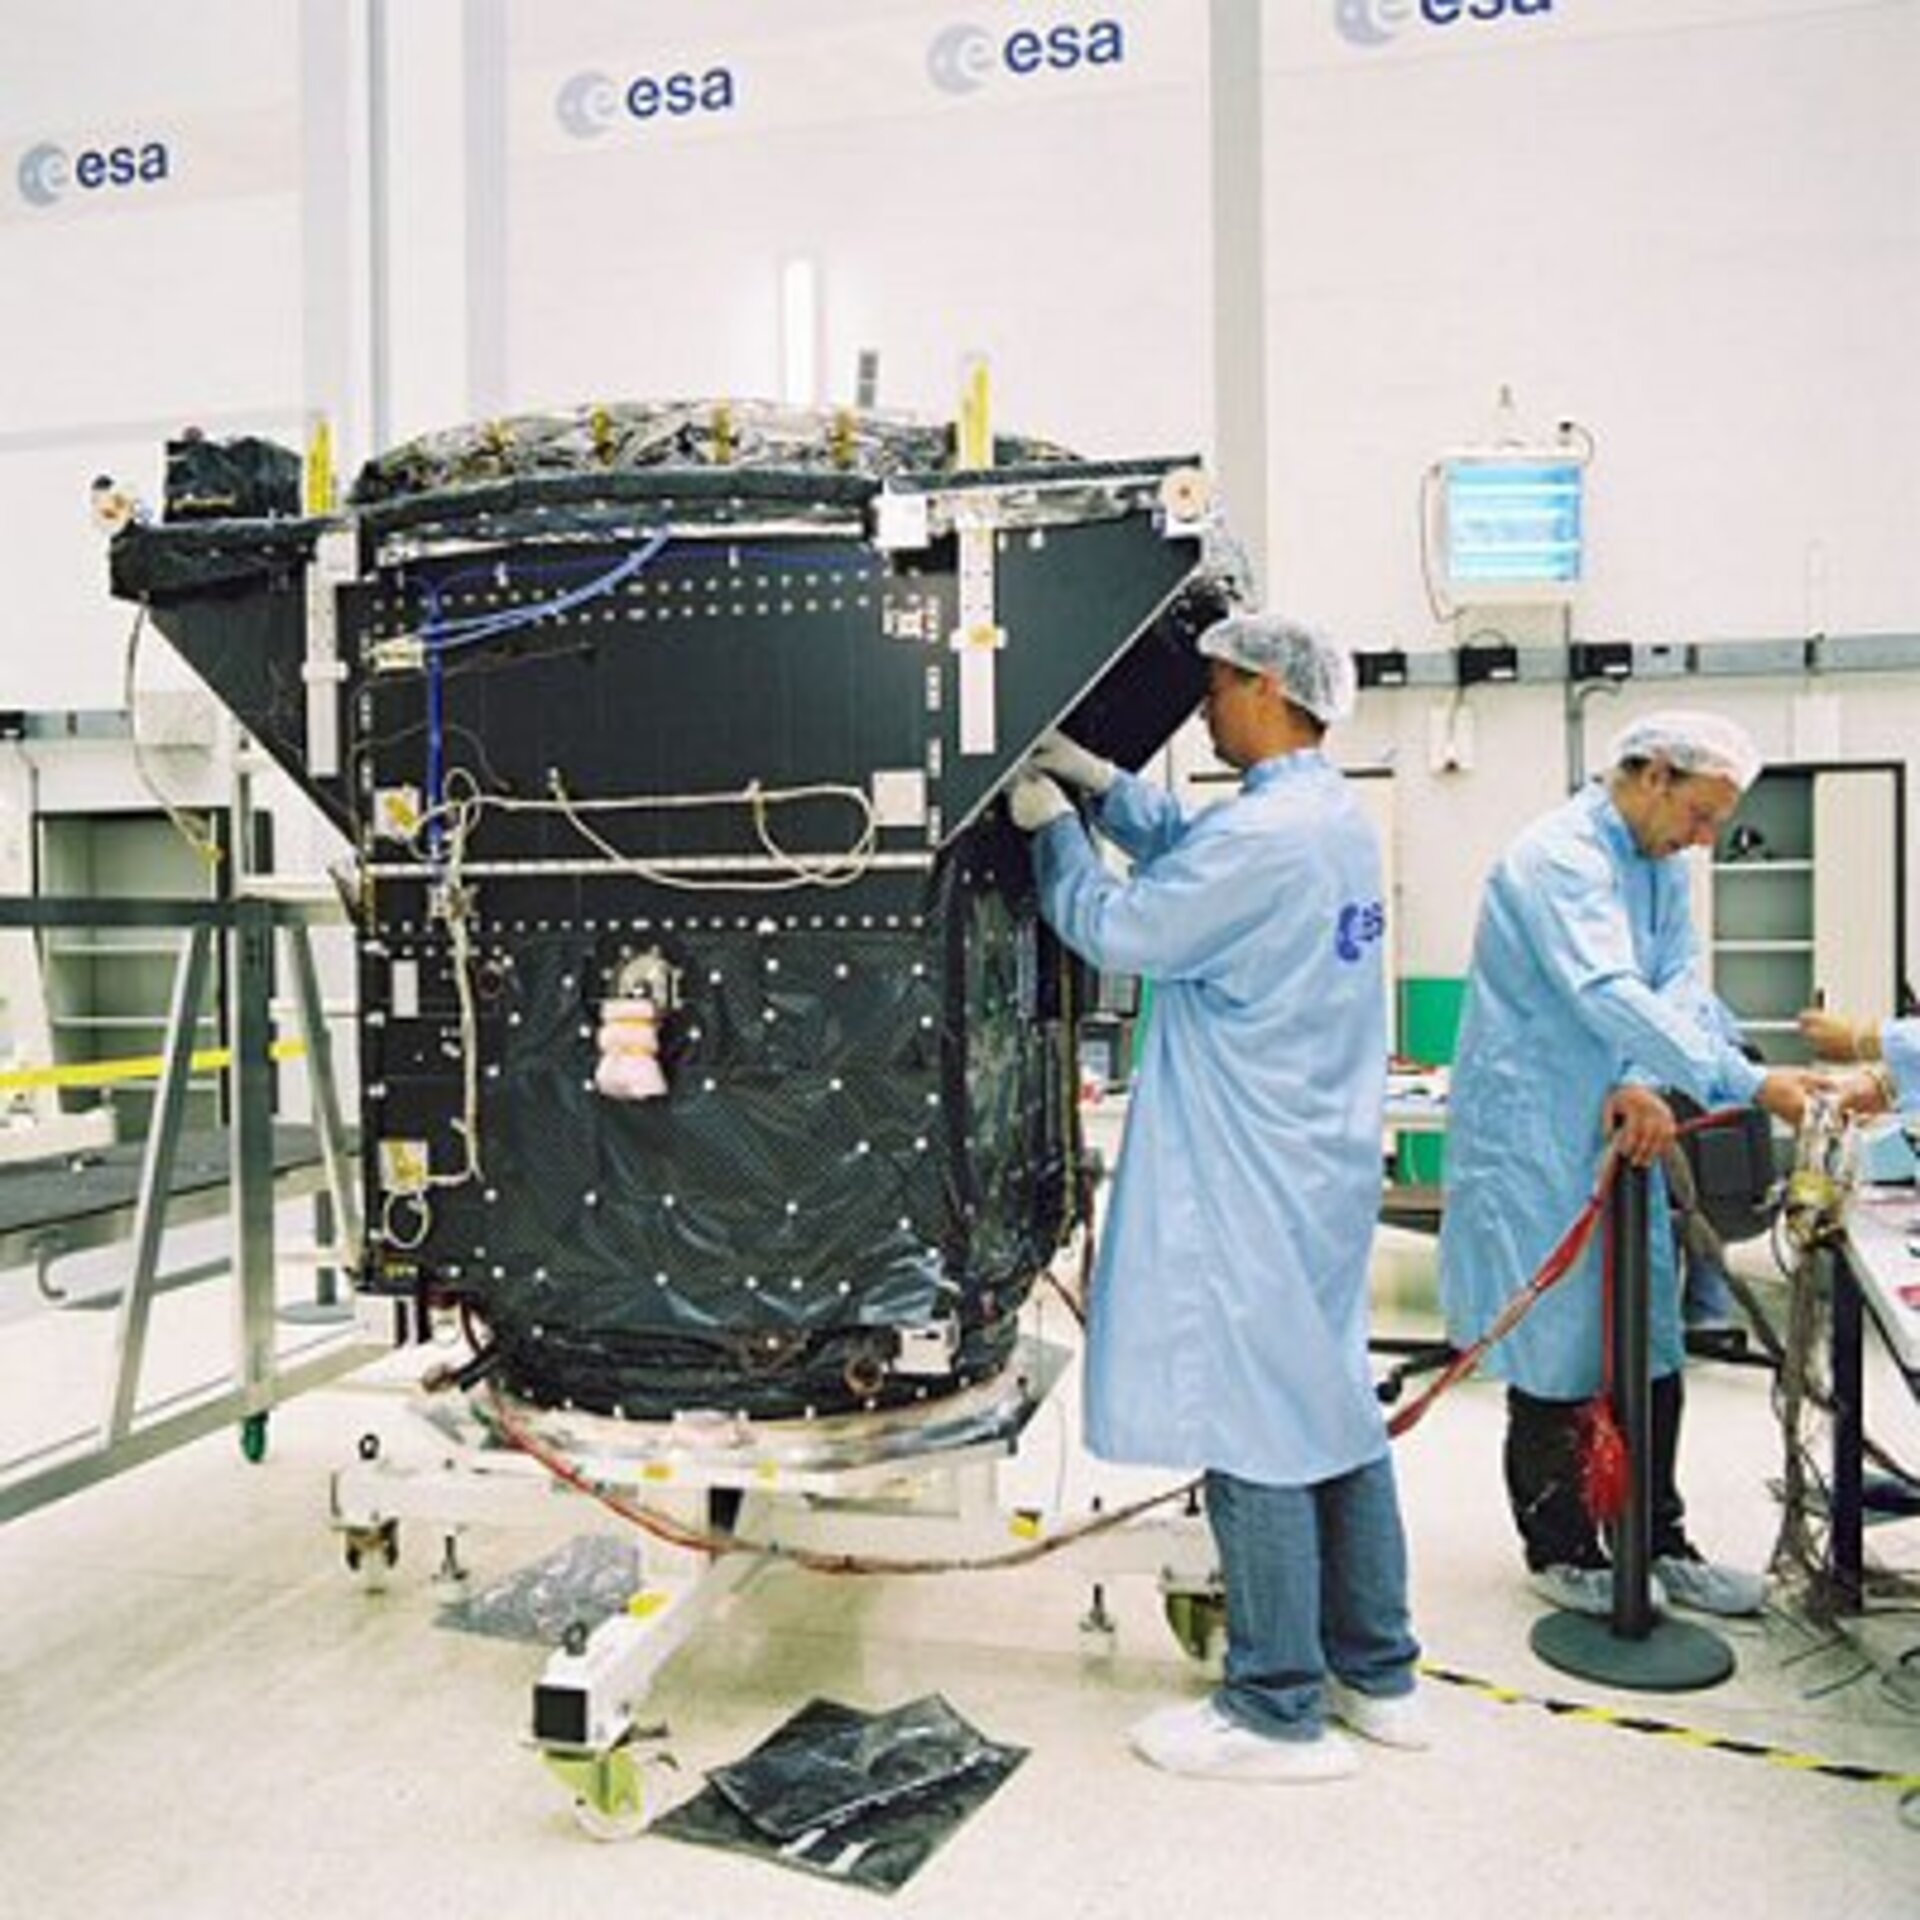 GSTB-V2/A being prepared for testing